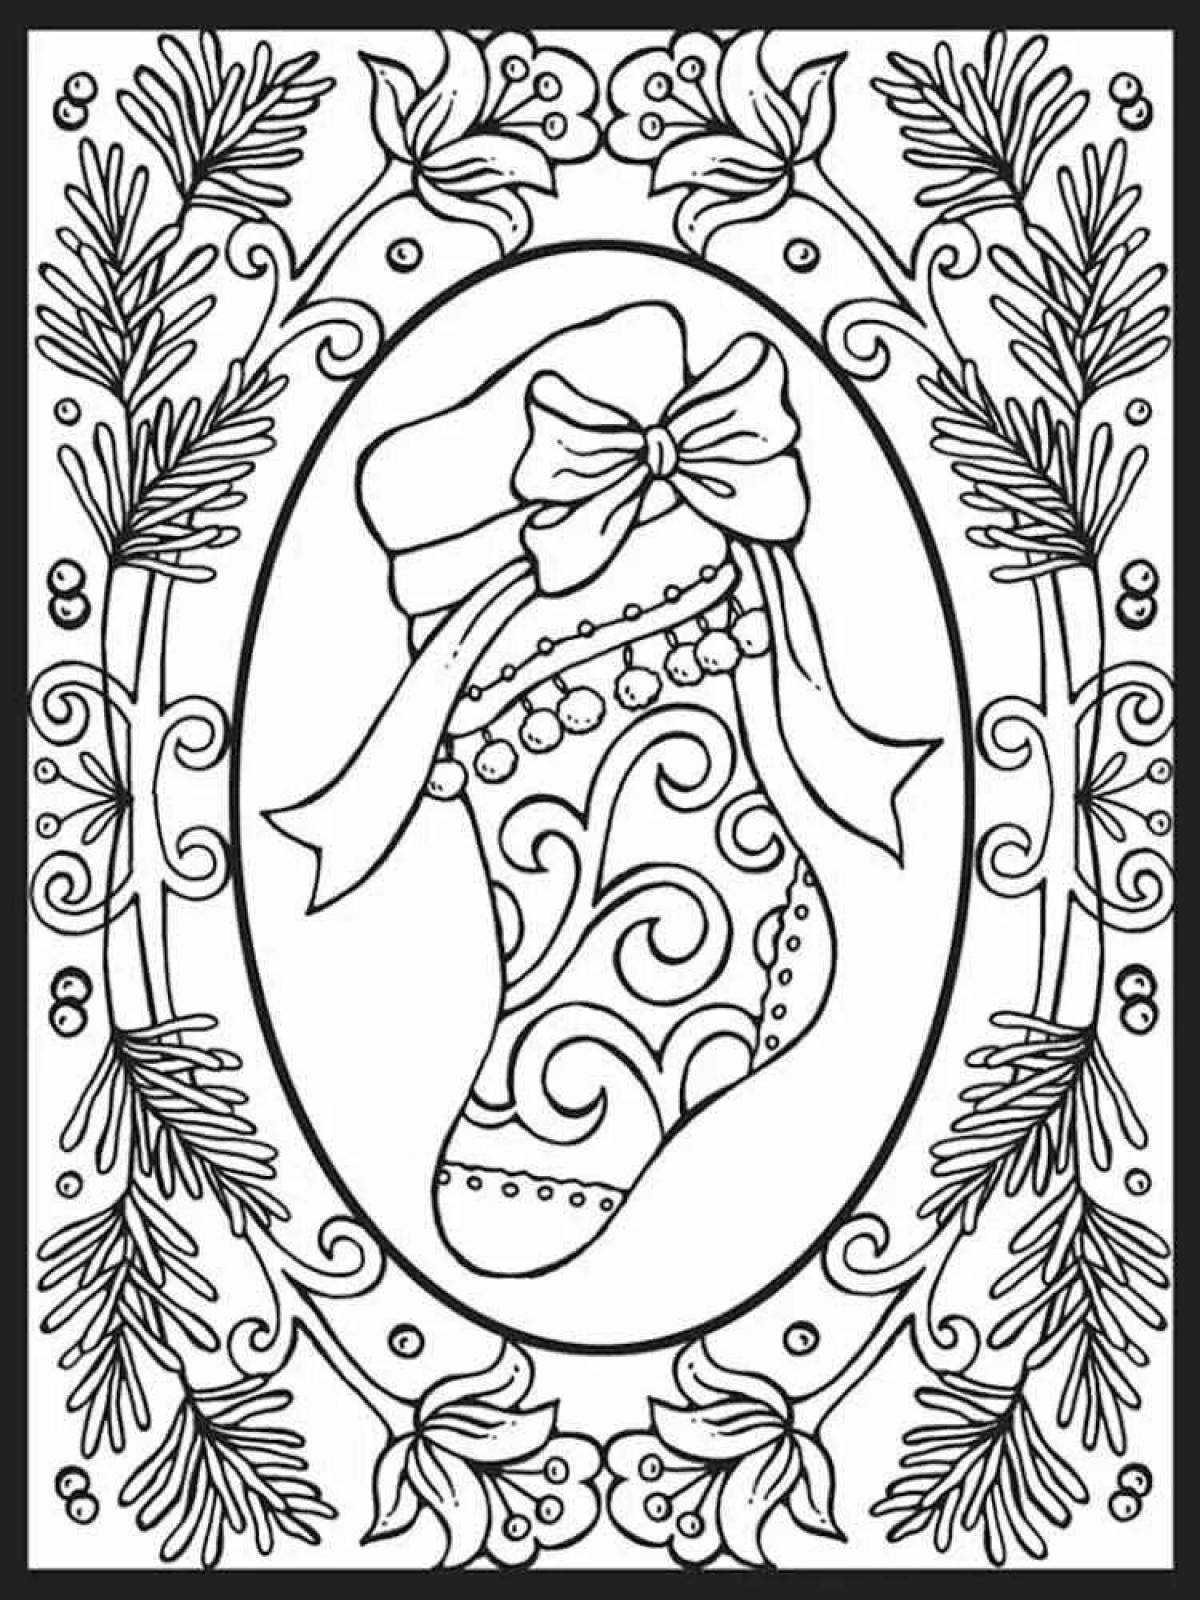 Fabulous Christmas coloring book for adults